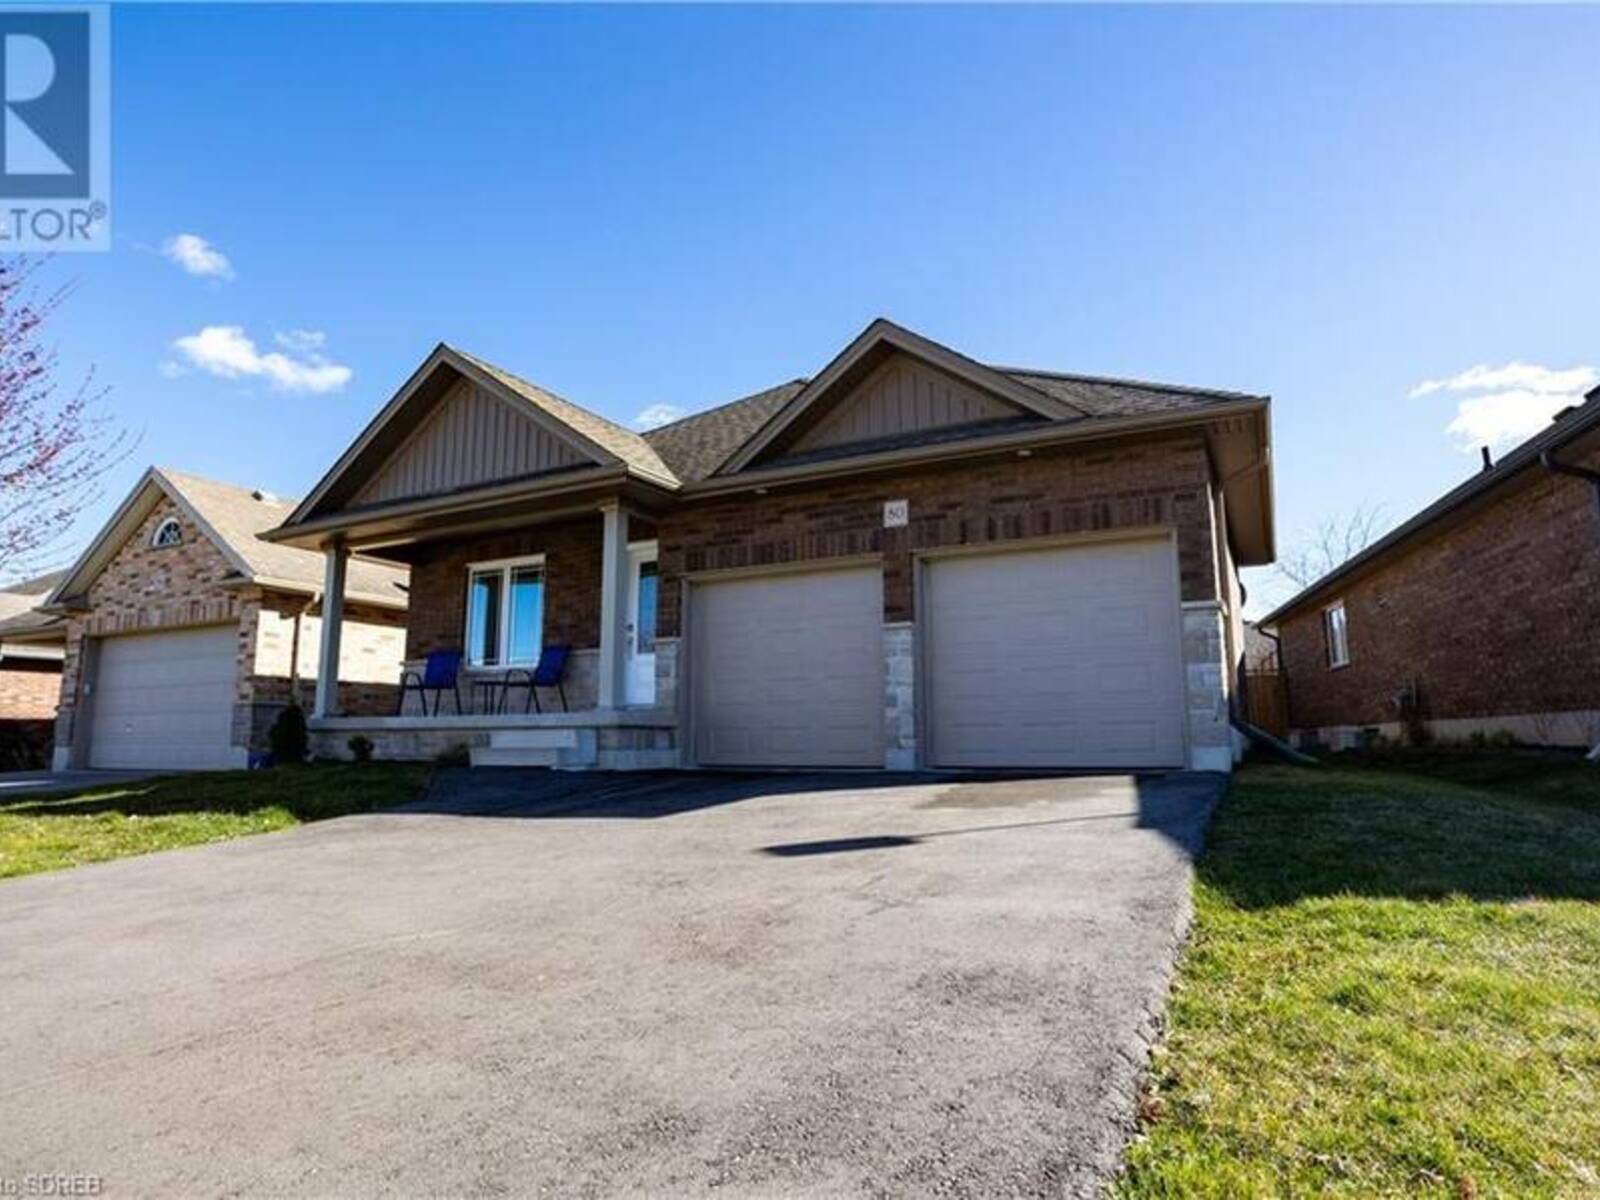 80 WILLOWDALE Crescent, Port Dover, Ontario N0A 1N5